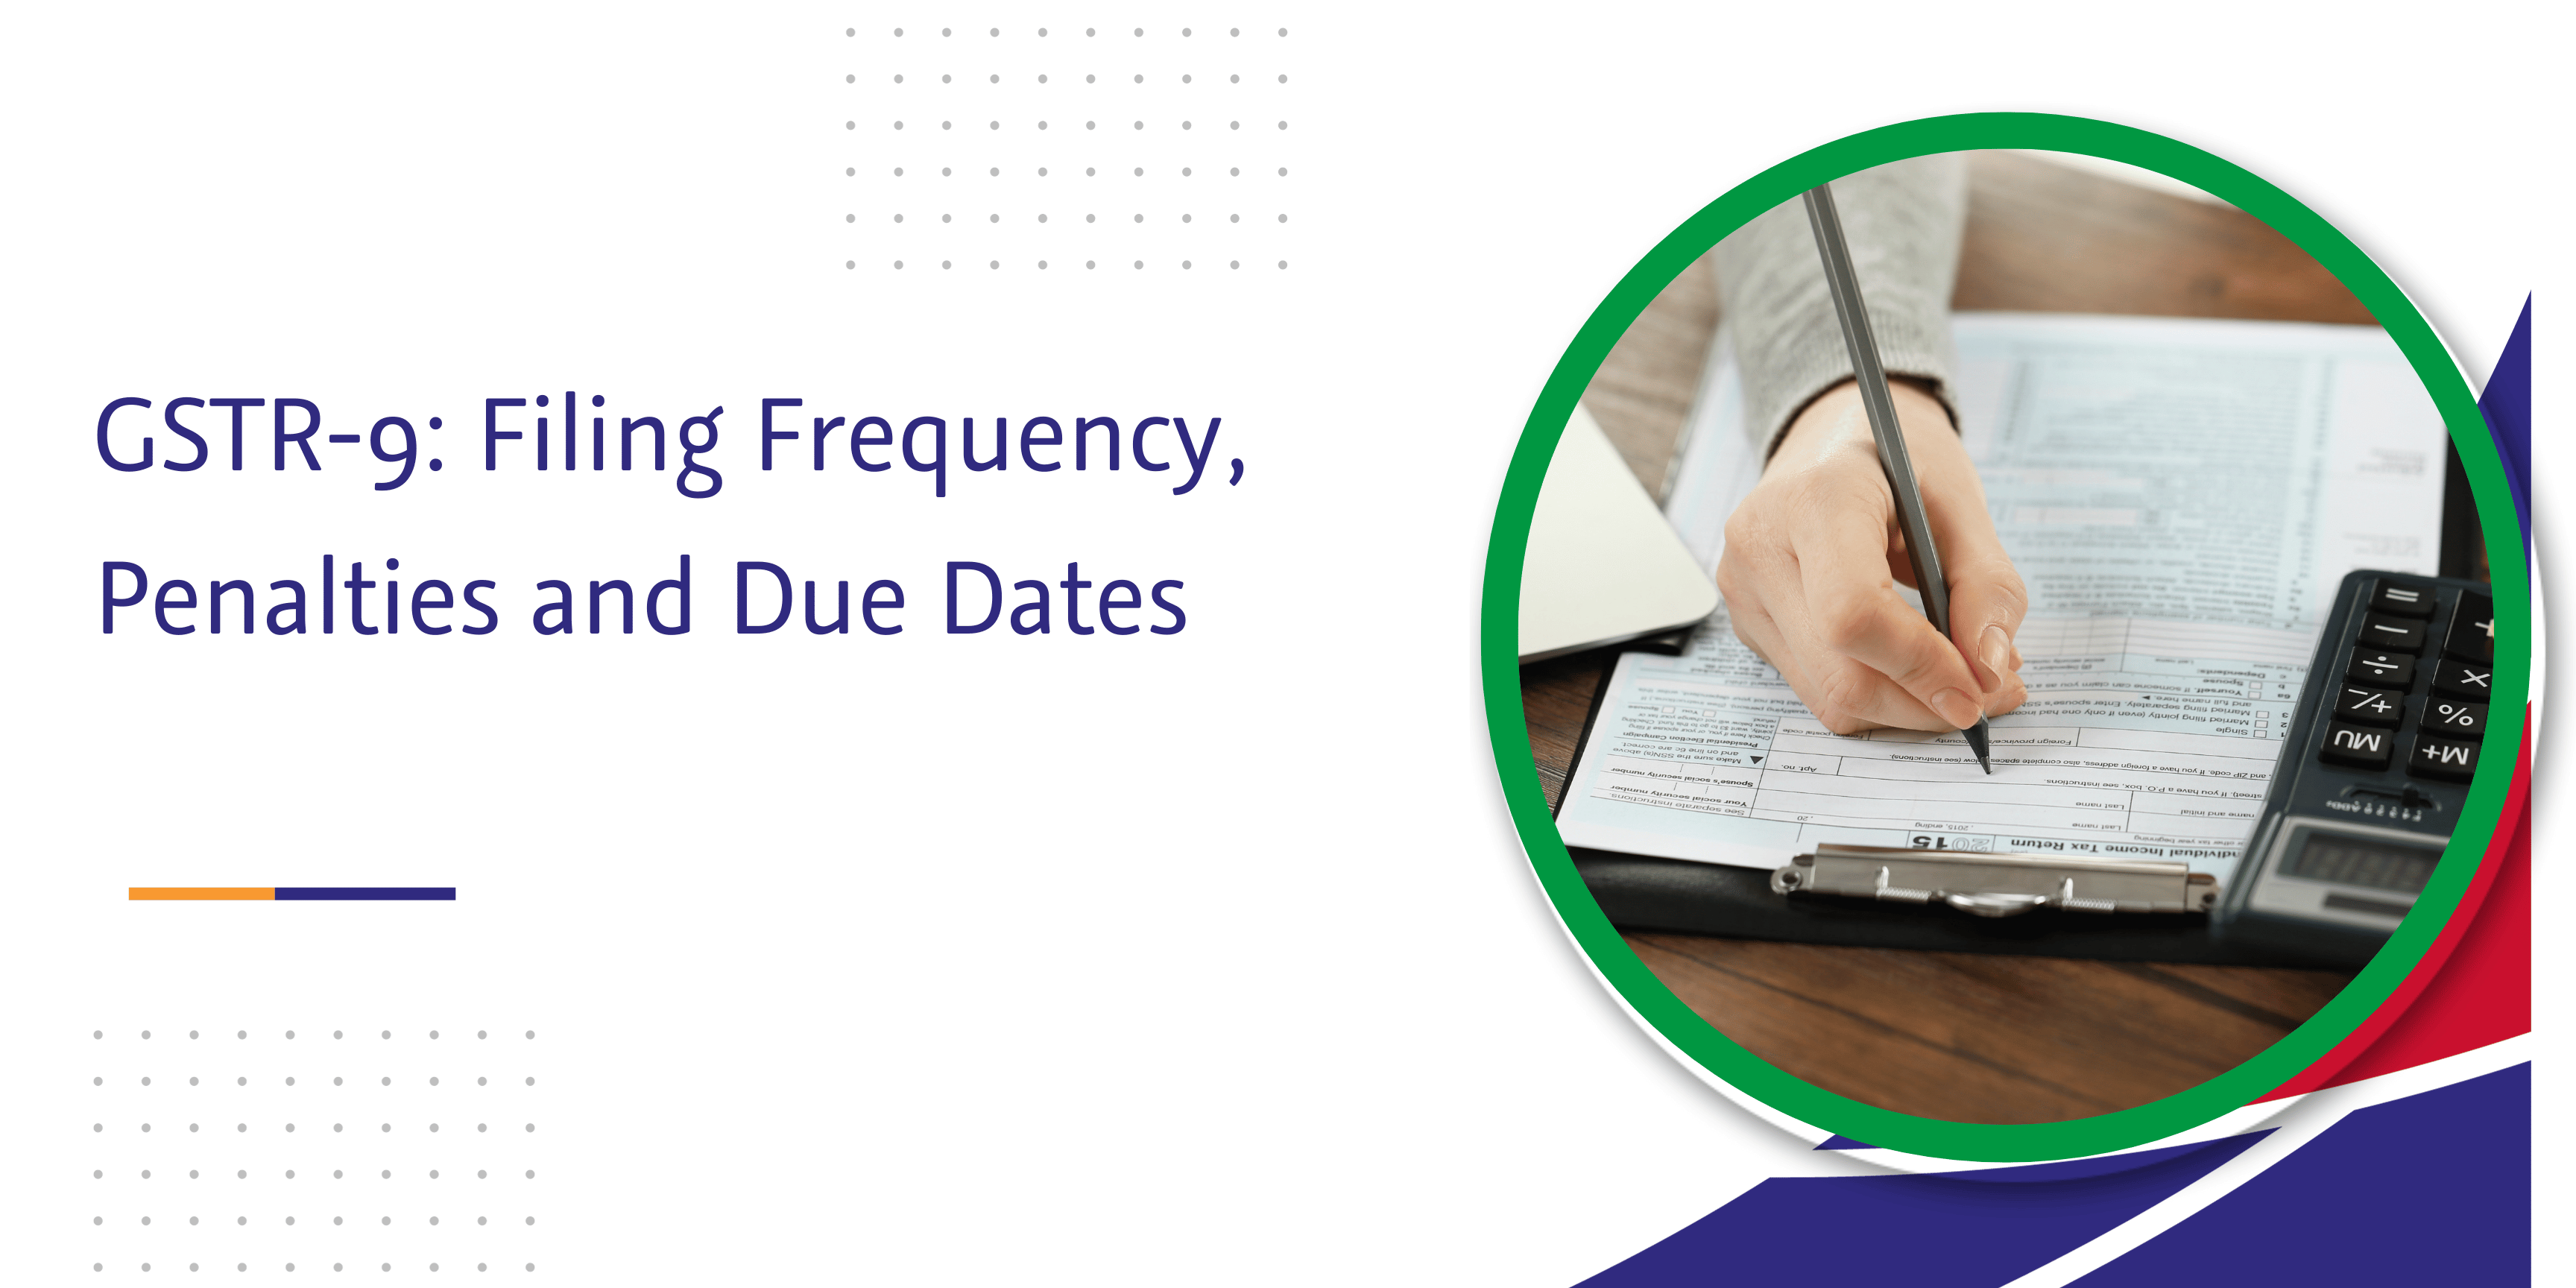 gstr-9 filing frequency penalties due dates